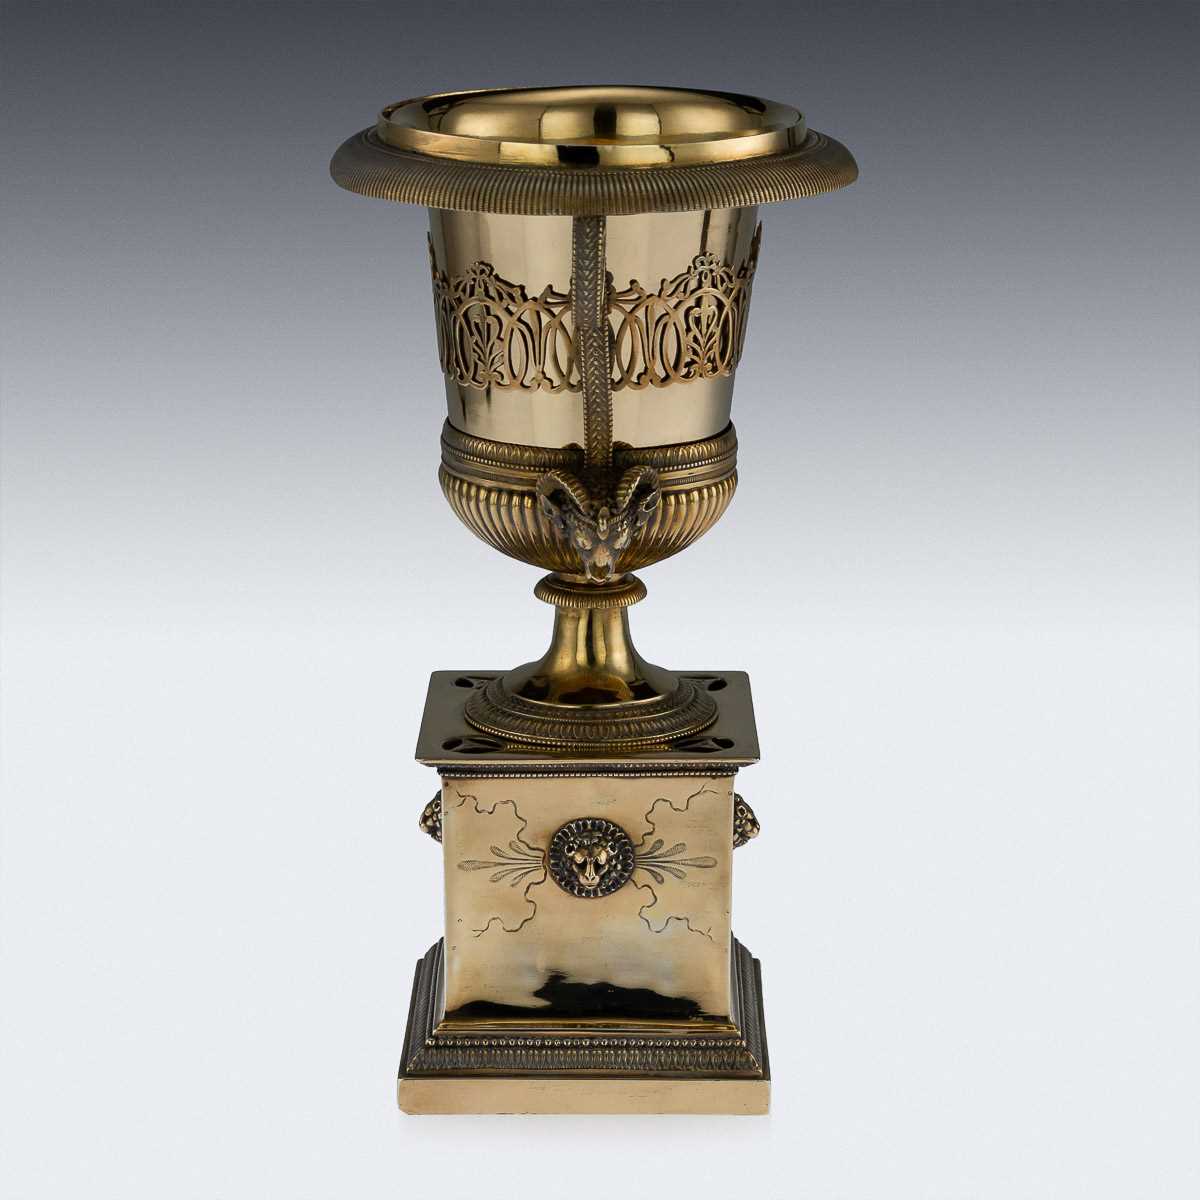 AN EARLY 19TH CENTURY SILVER GILT URN BY MARC JACQUART, PARIS - Image 2 of 19